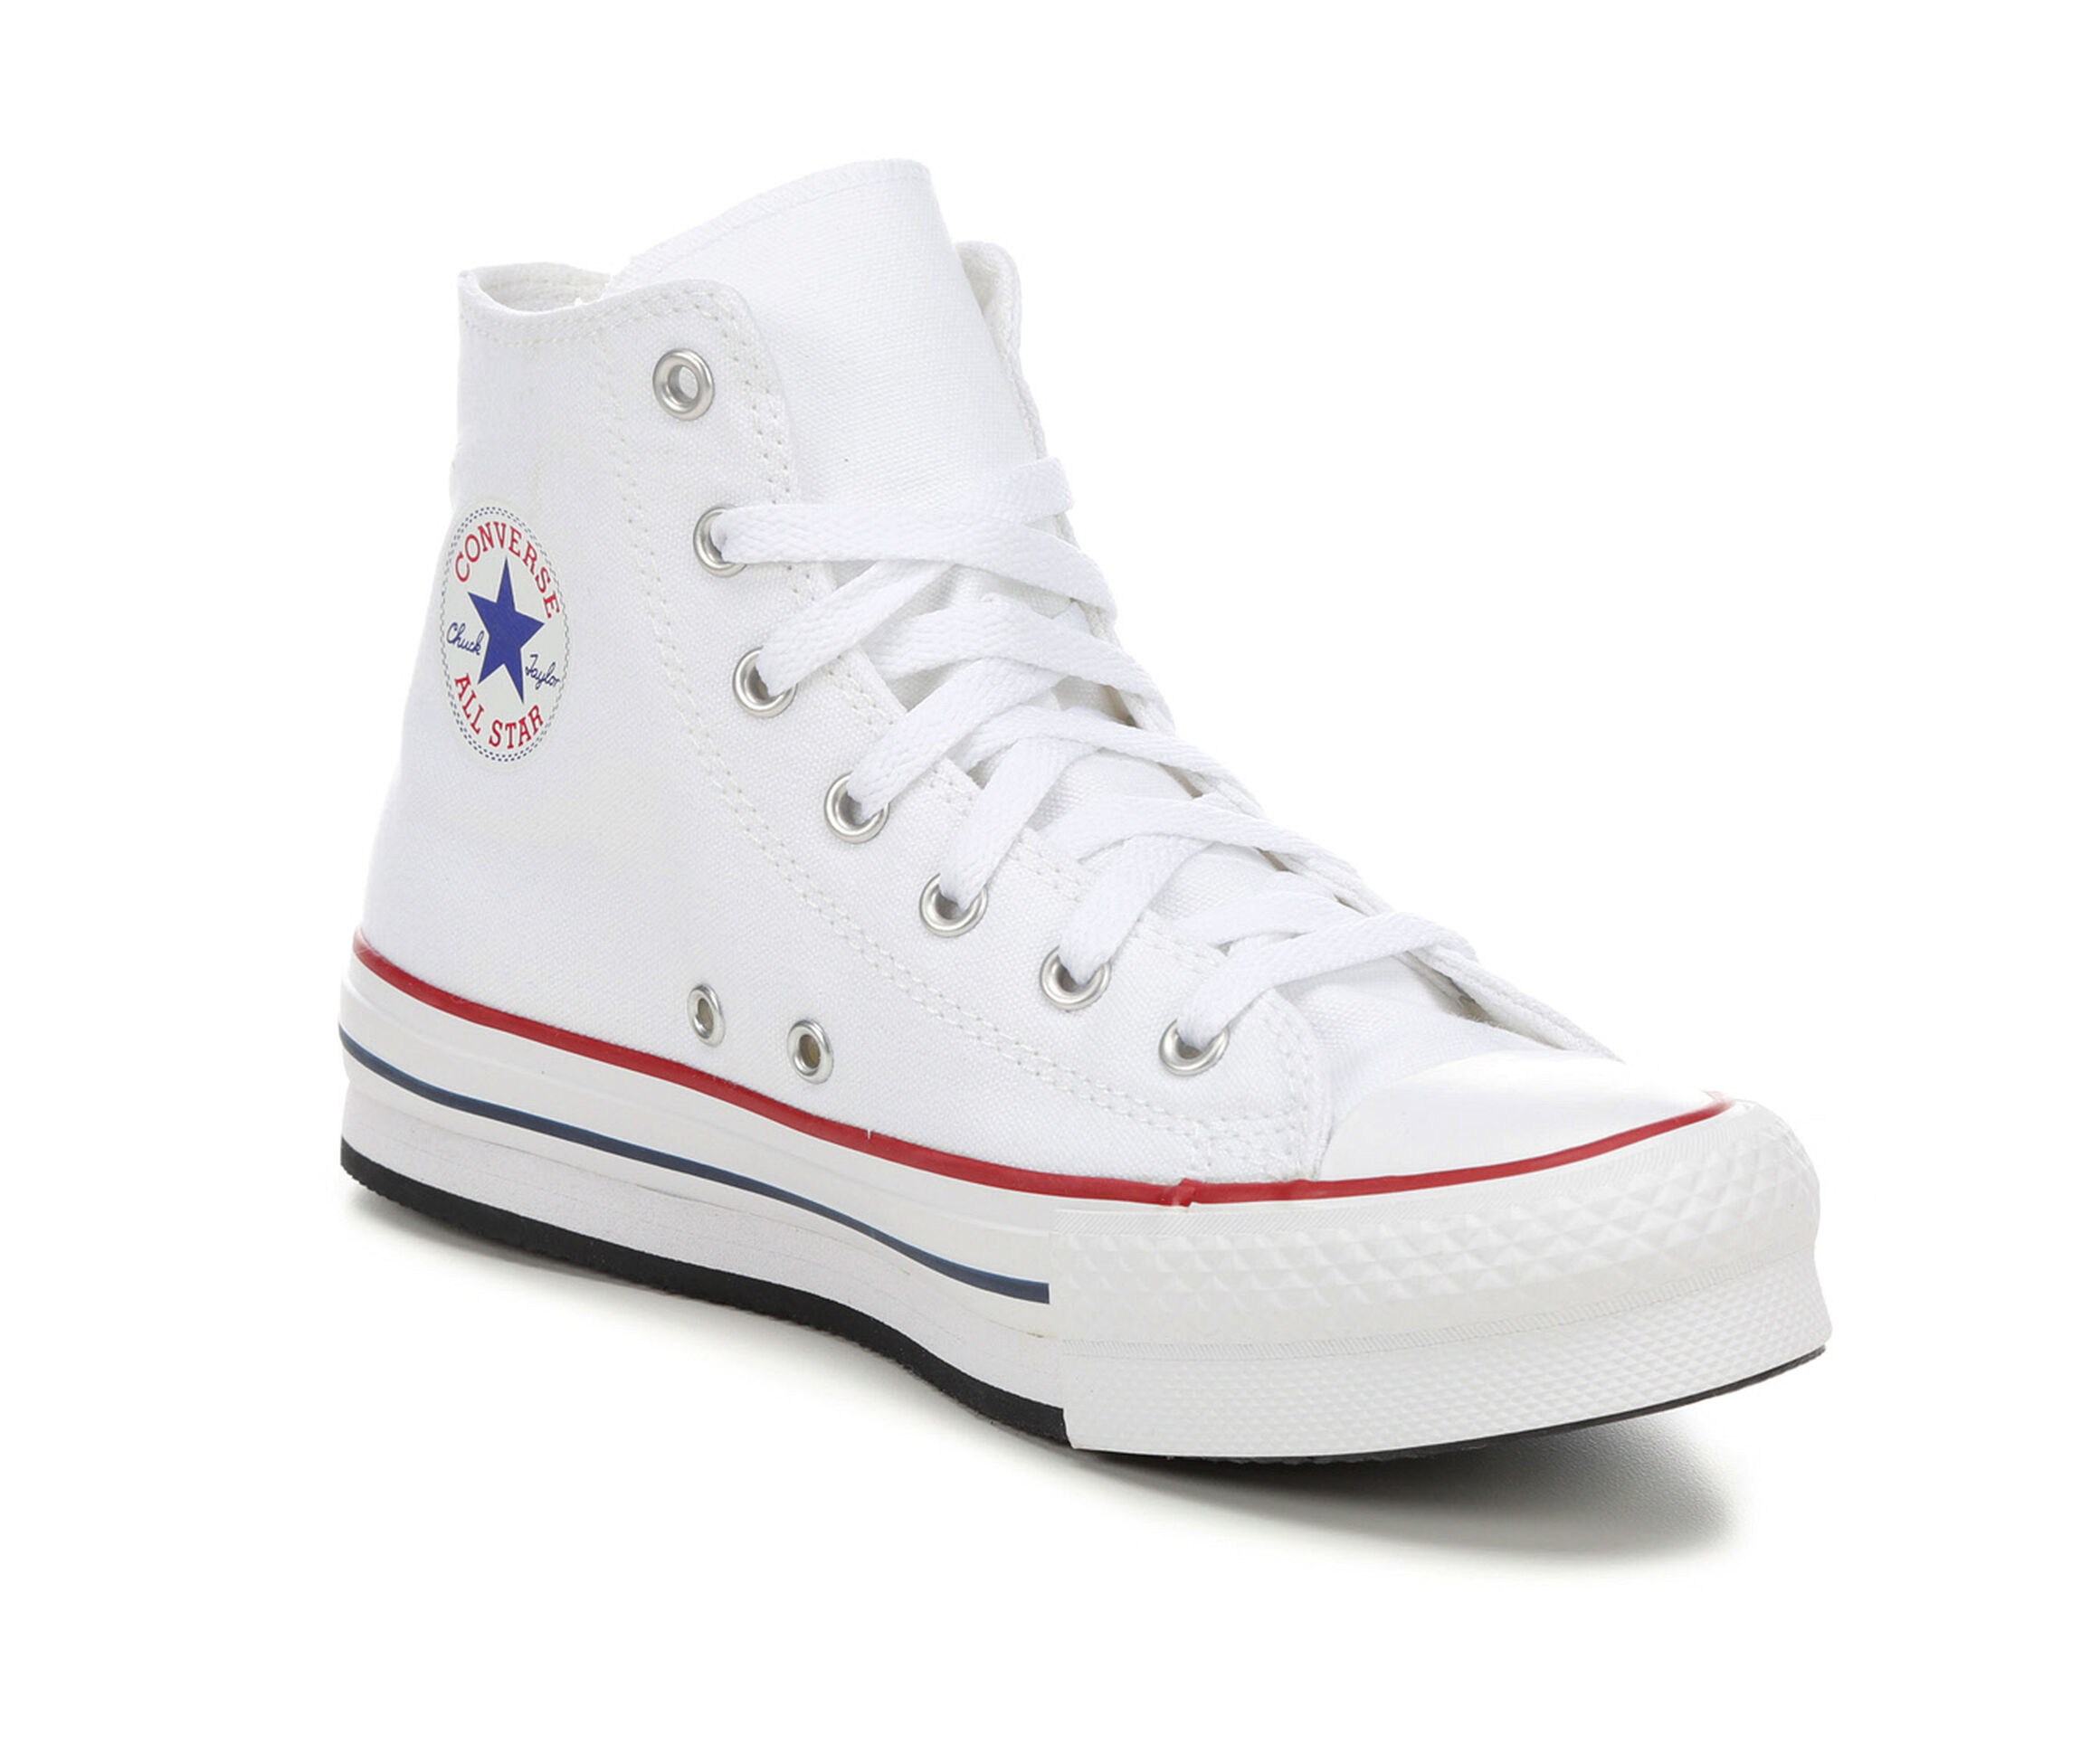 Converse Shoes & Sneakers | Shoe Carnival